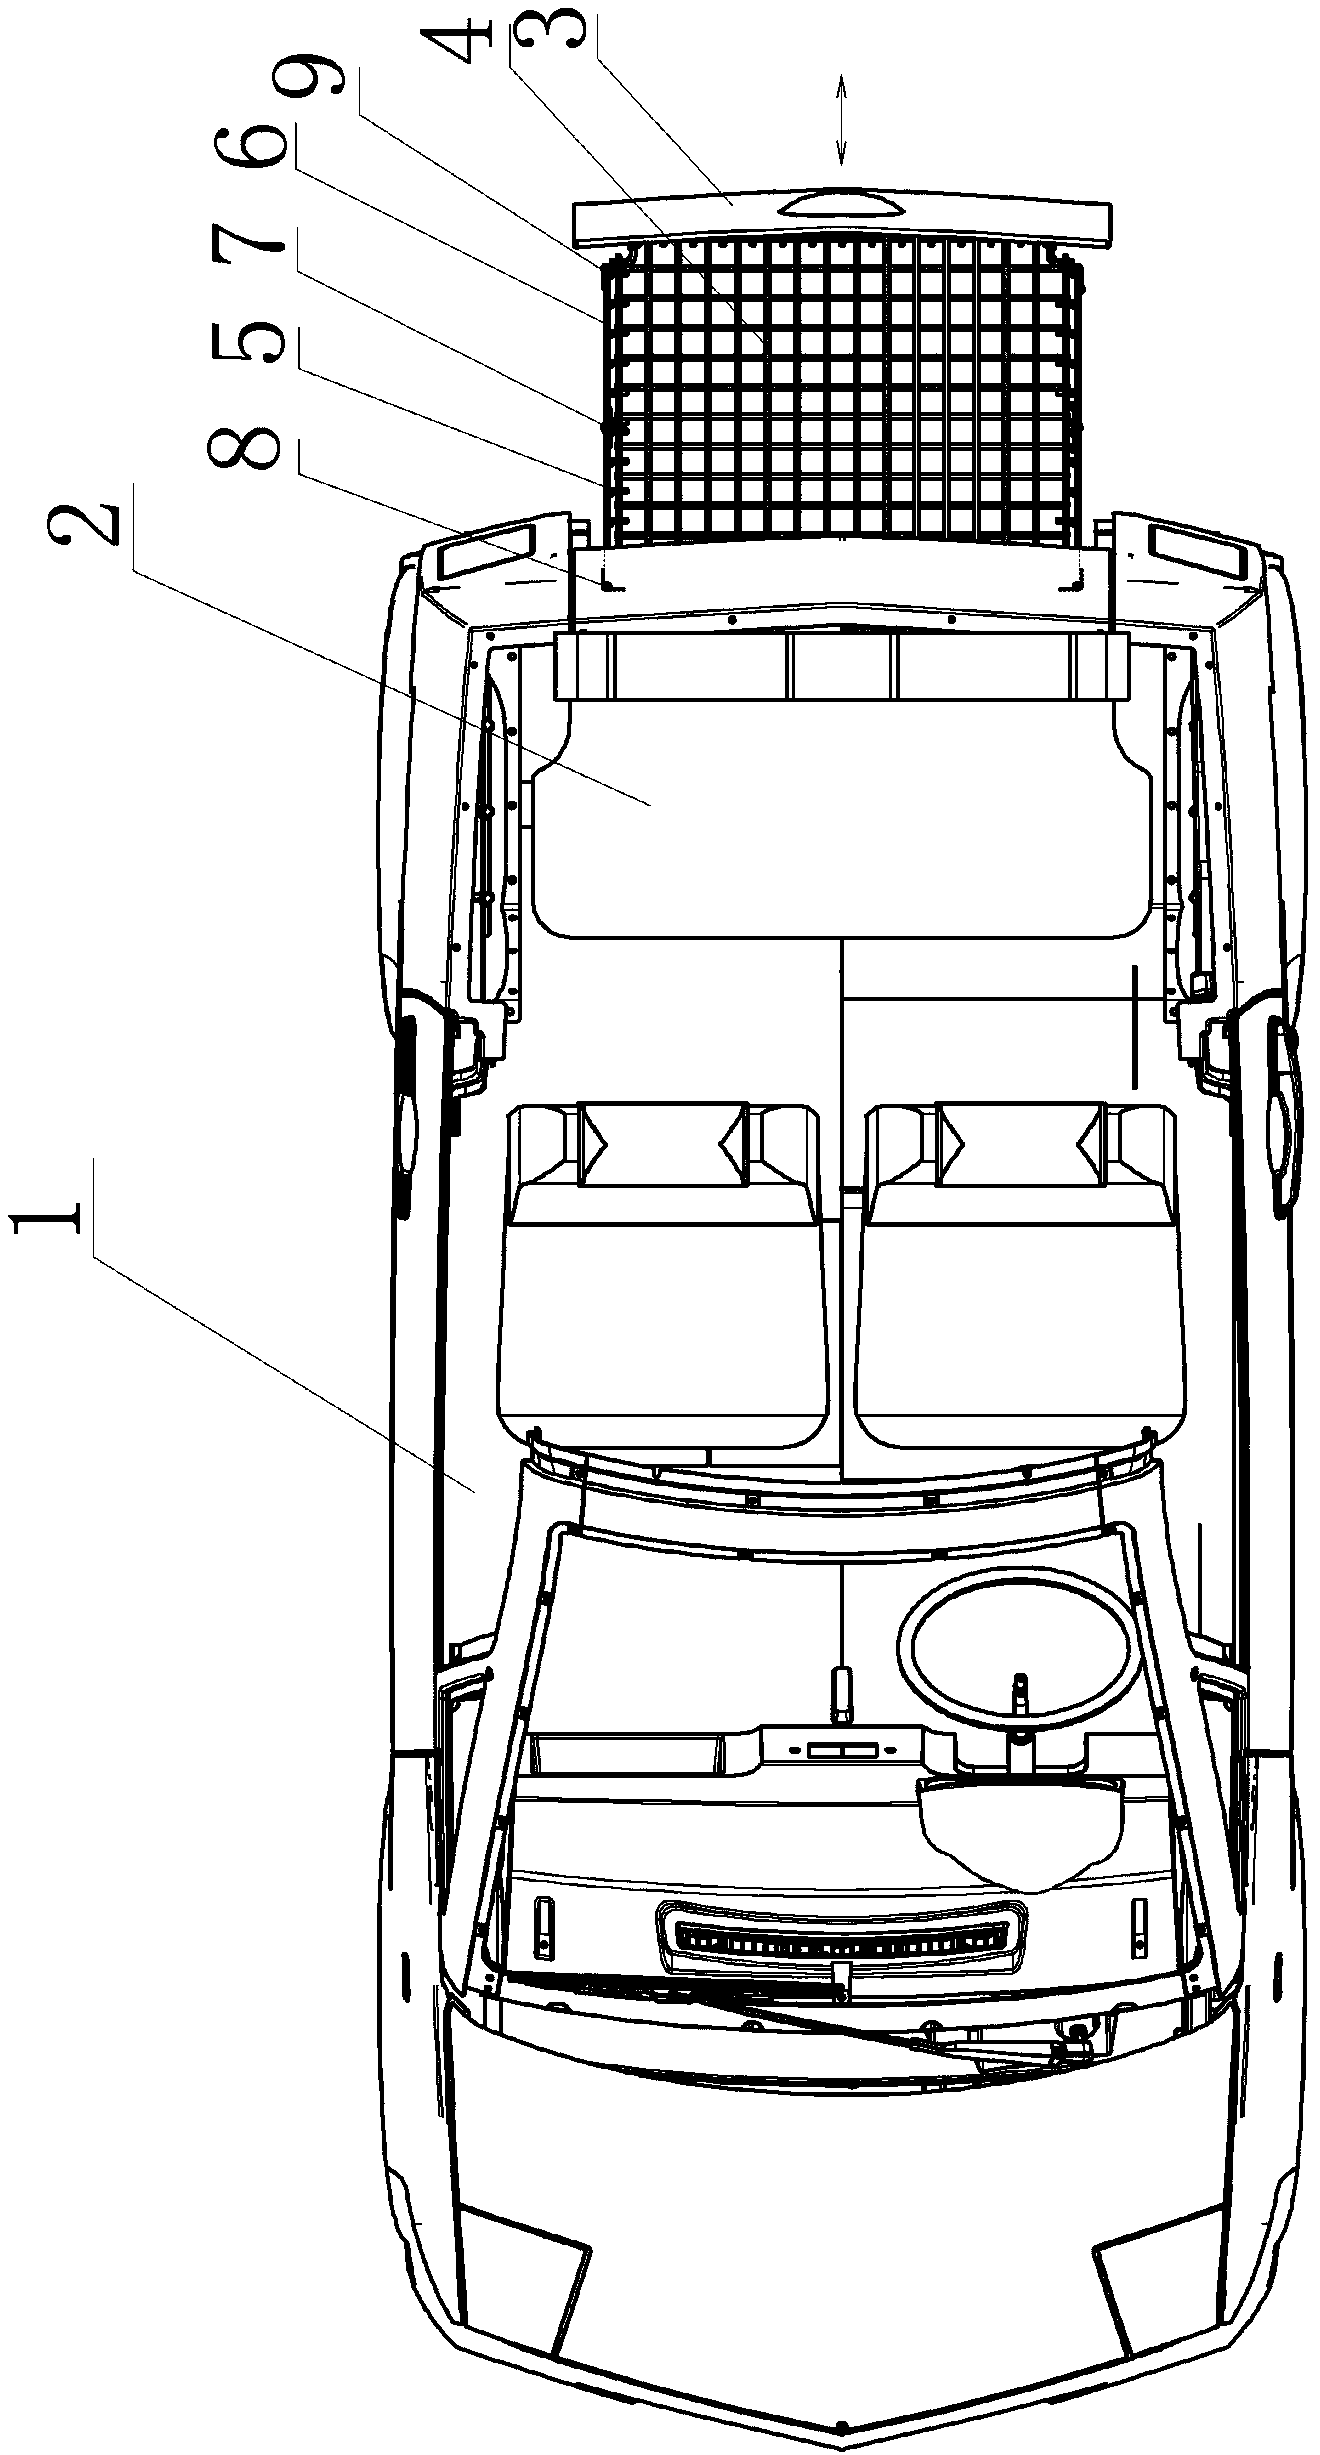 Double-row electric vehicle with telescopic cargo hopper